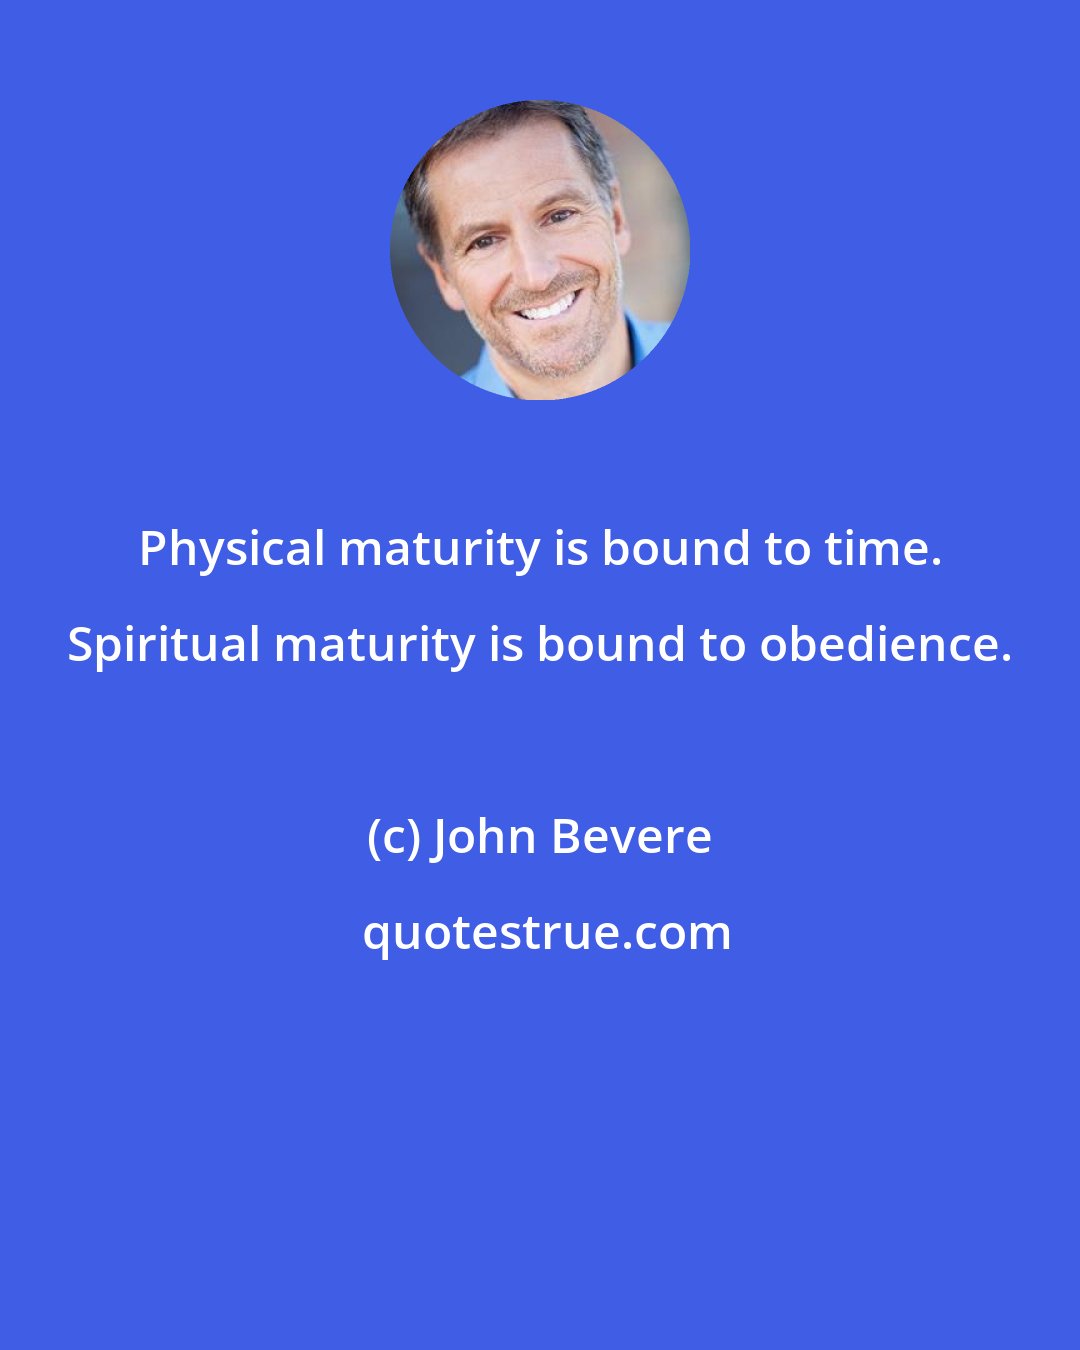 John Bevere: Physical maturity is bound to time. Spiritual maturity is bound to obedience.